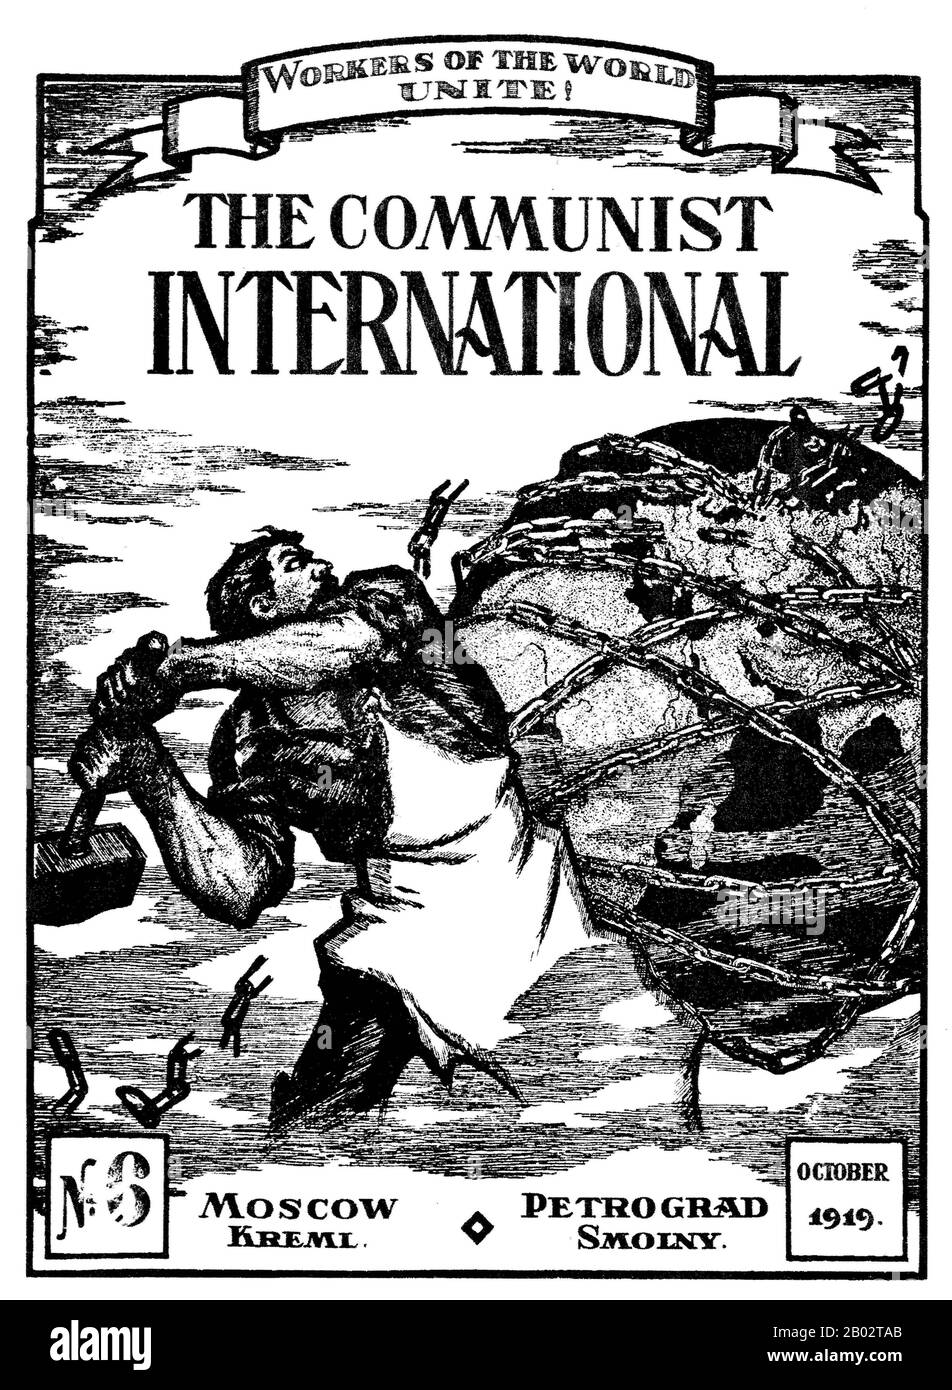 The Communist International, abbreviated as Comintern and also known as the Third International (1919–1943), was an international communist organization that advocated world communism. The International intended to fight 'by all available means, including armed force, for the overthrow of the international bourgeoisie and for the creation of an international Soviet republic as a transition stage to the complete abolition of the State'.  The Comintern was founded after the 1915 Zimmerwald Conference in which Vladimir Lenin had organized the 'Zimmerwald Left' against those who refused to approve Stock Photo